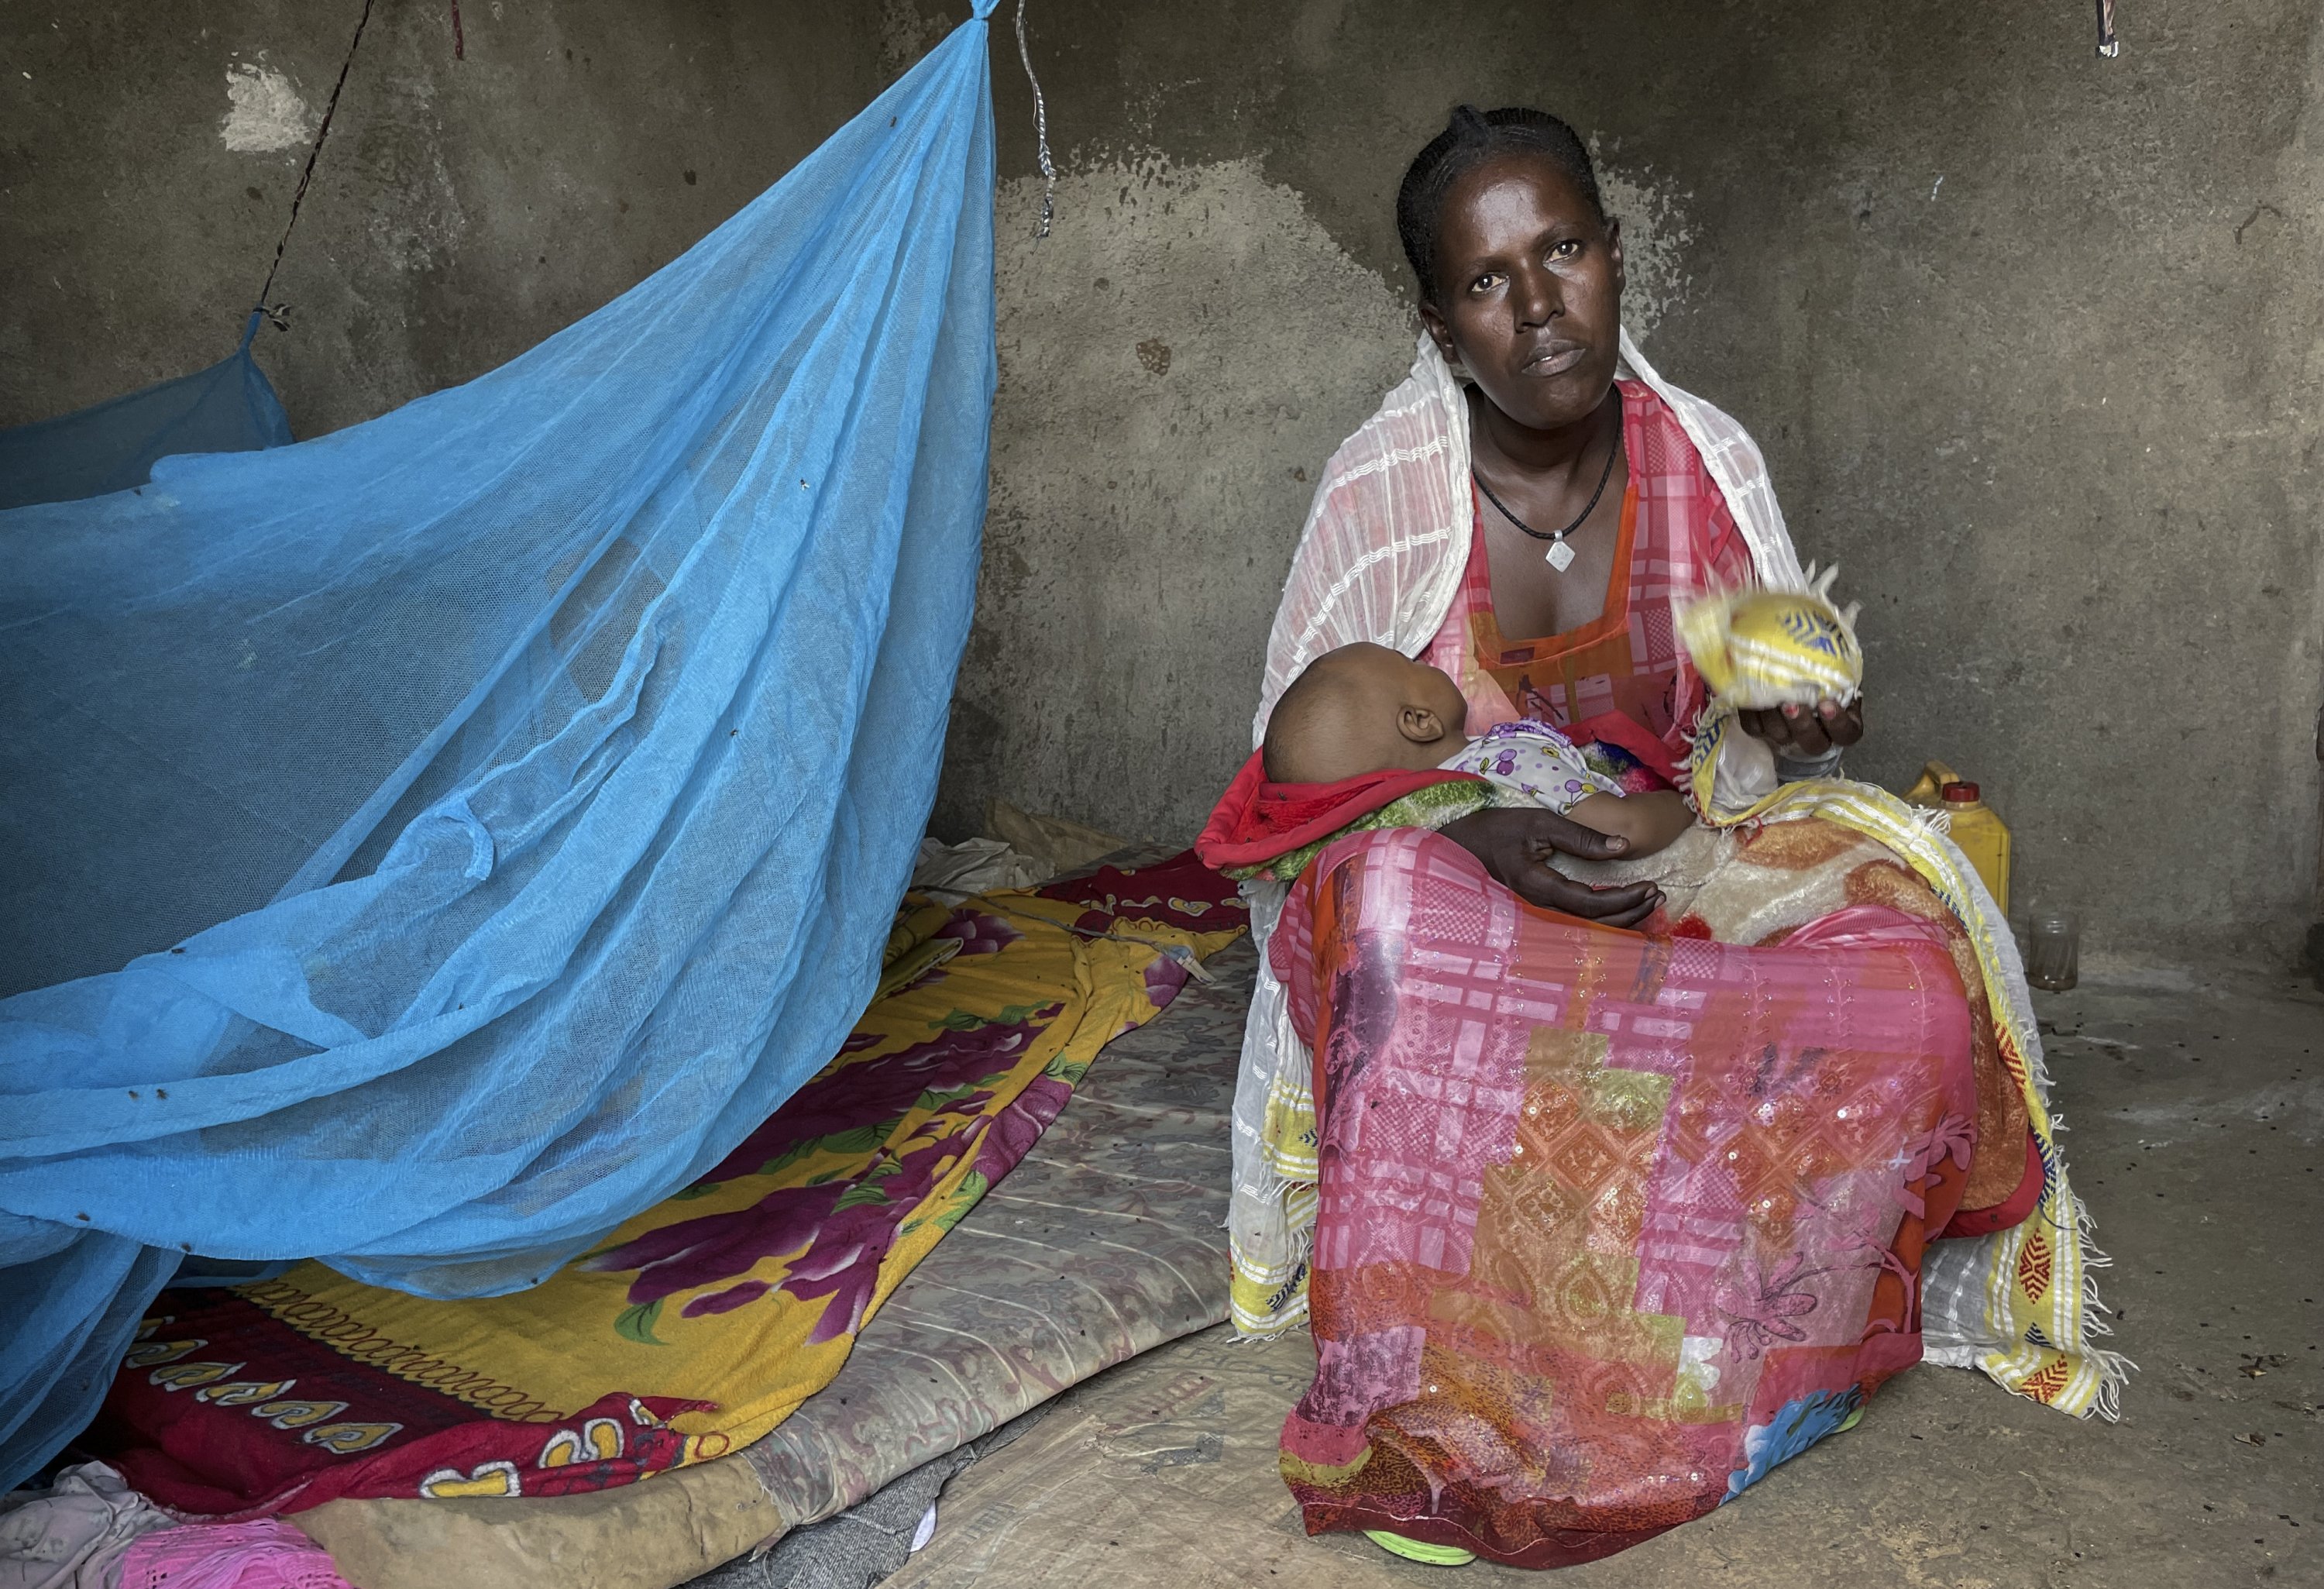 Letemariam, a mother of six, sits with her baby who was born in a former camp for Eritrean refugees now used by internally displaced Tigrayans, after escaping fighting in her hometown in western Tigray, in the Hitsats camp in the Tigray region, northern Ethiopia, Aug. 21, 2021. (AP Photo)